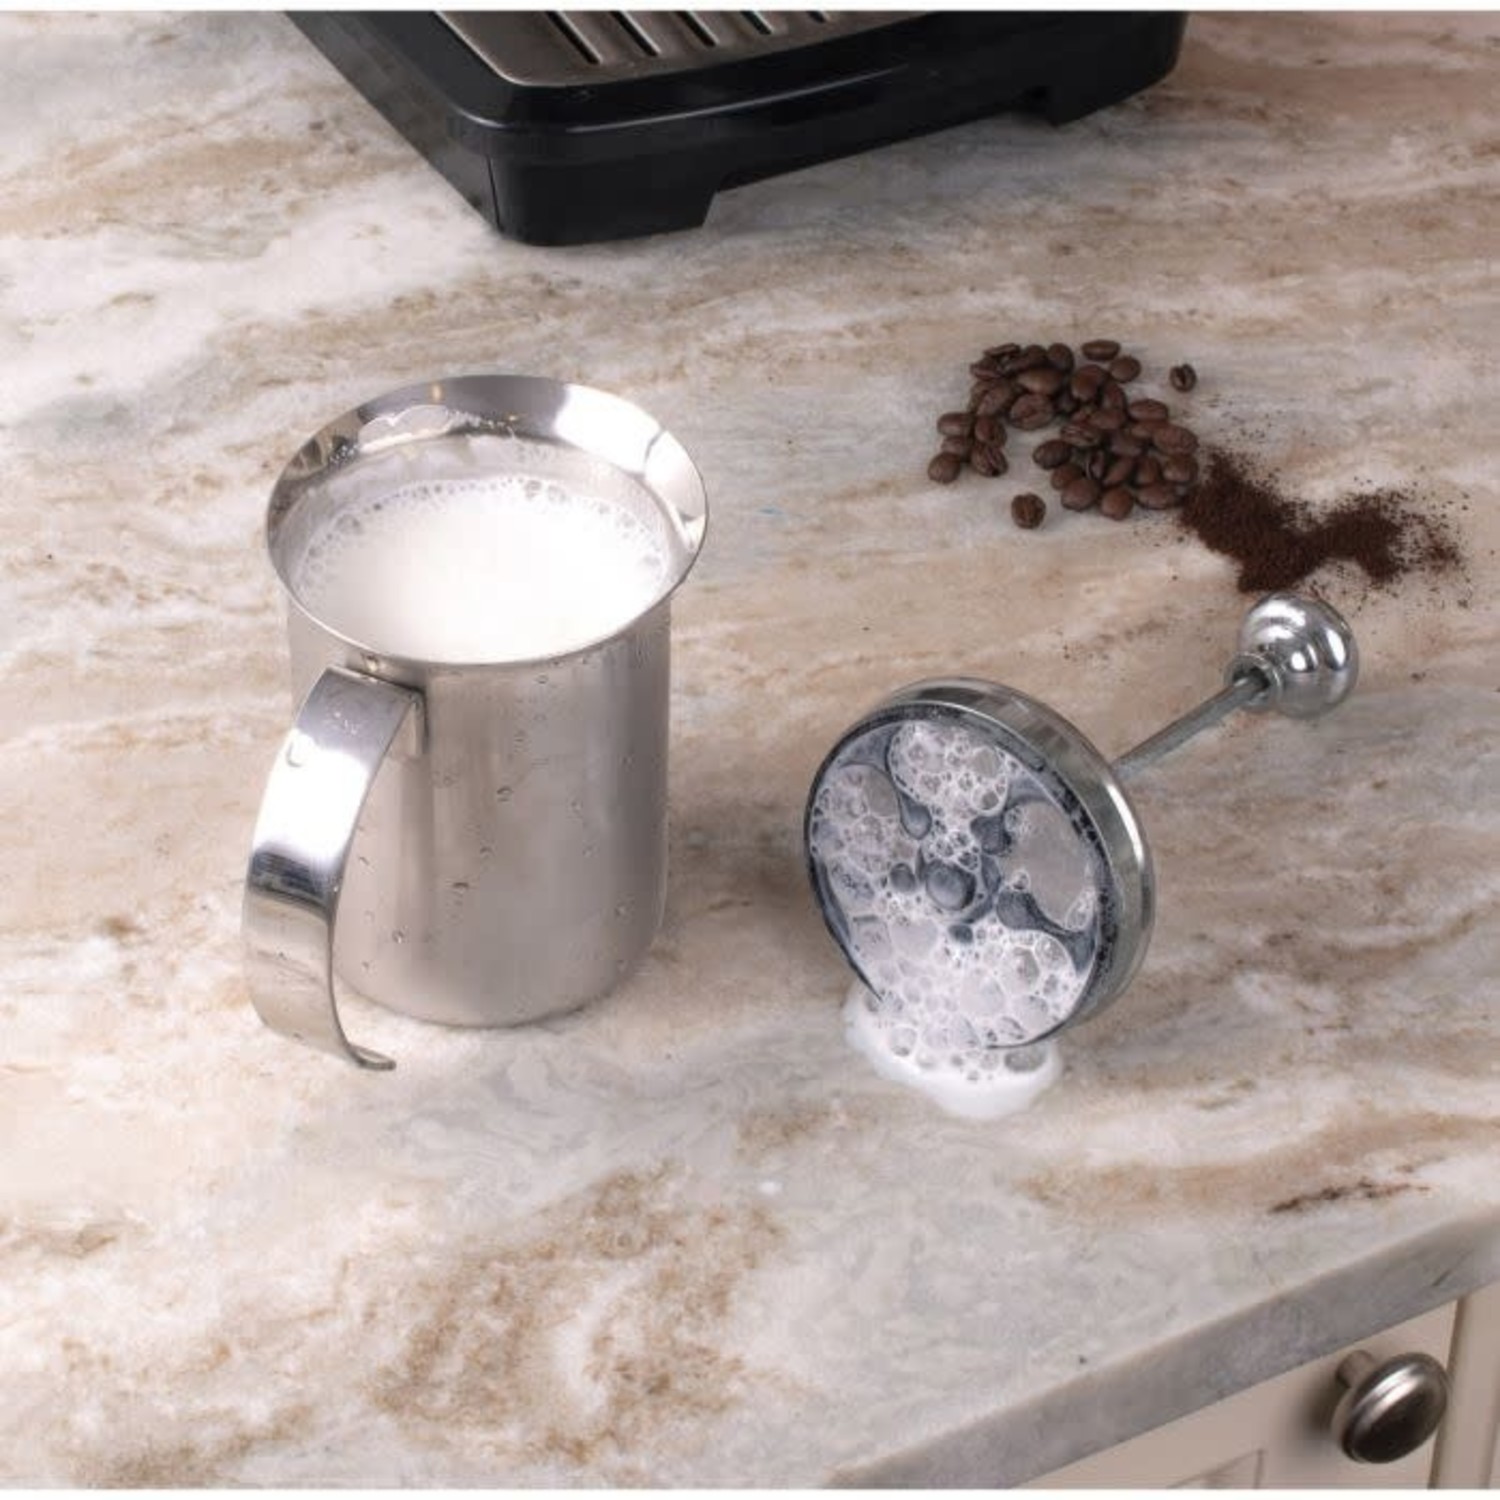 Milk Frother with Batteries Included Online